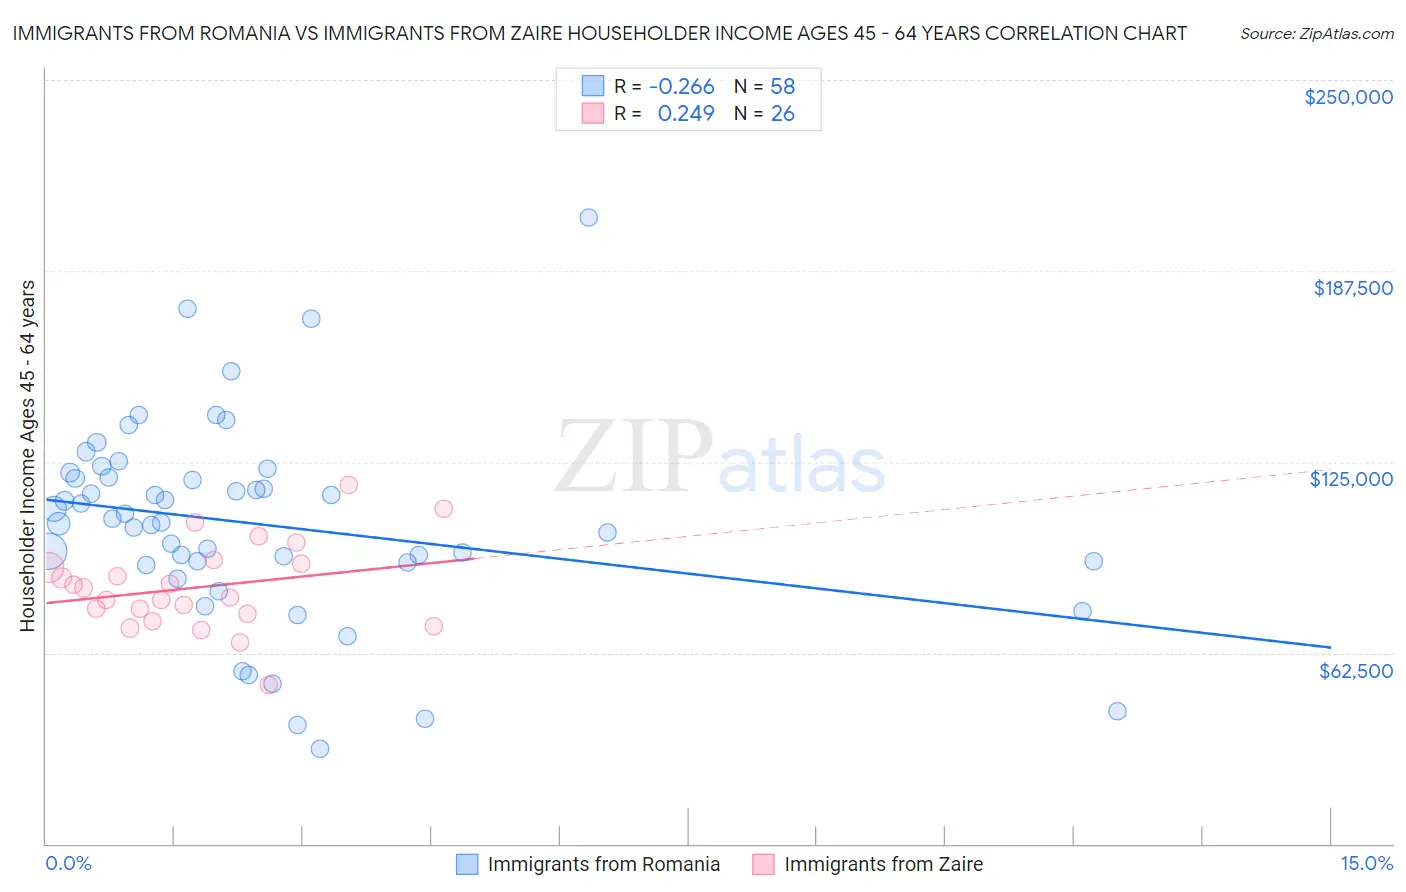 Immigrants from Romania vs Immigrants from Zaire Householder Income Ages 45 - 64 years